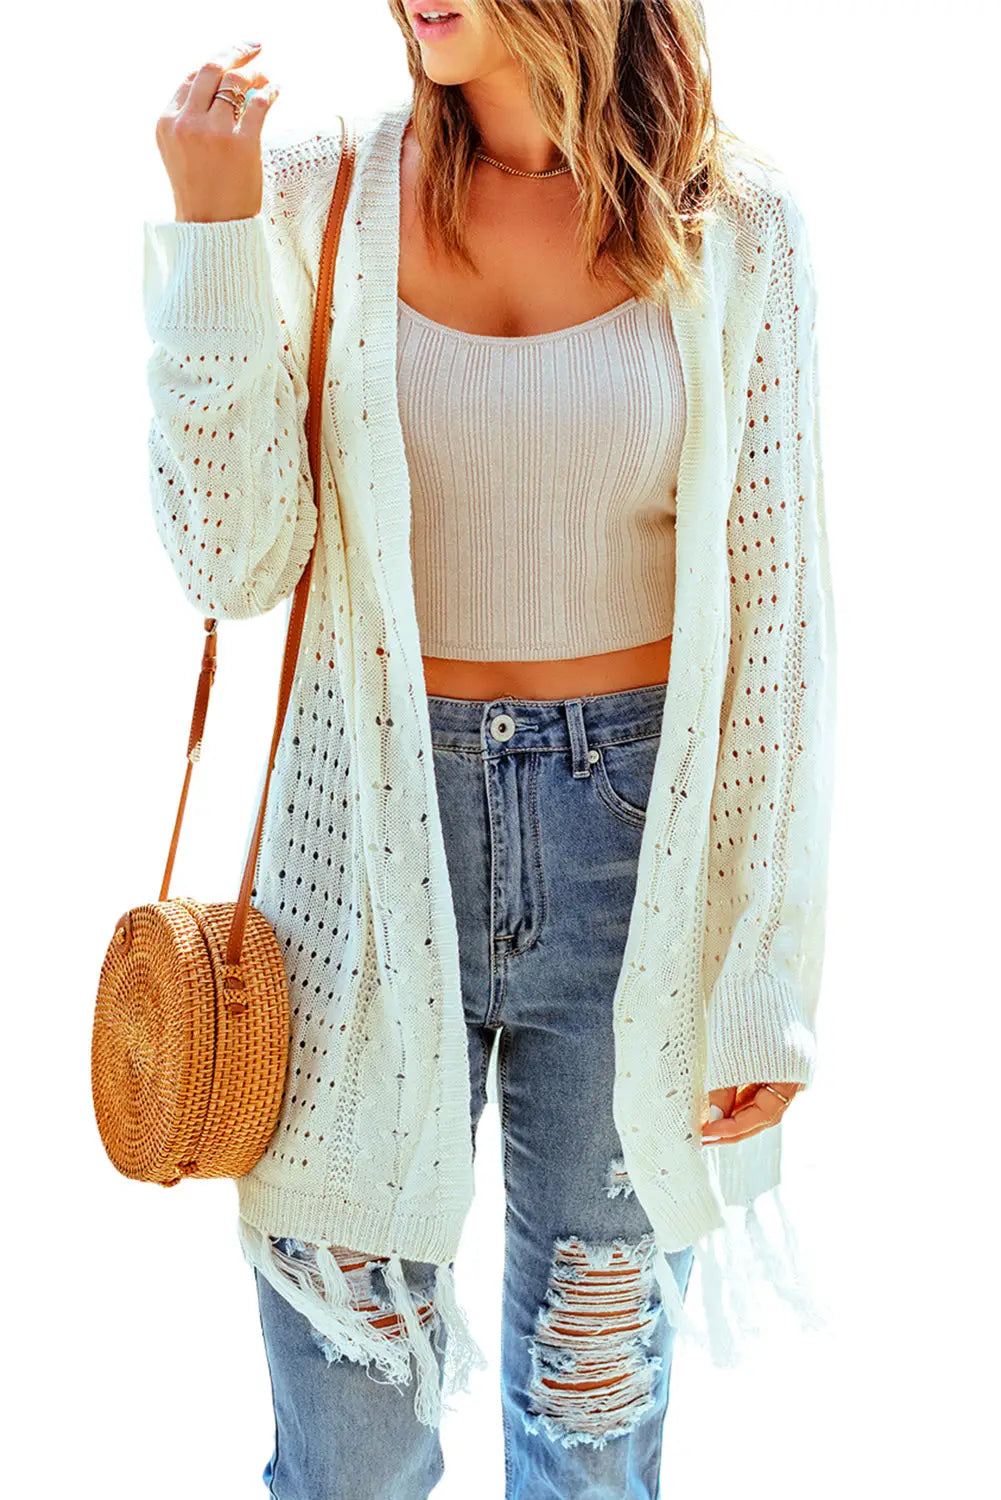 Beige tasseled hollow-out cable knit cardigan - tops